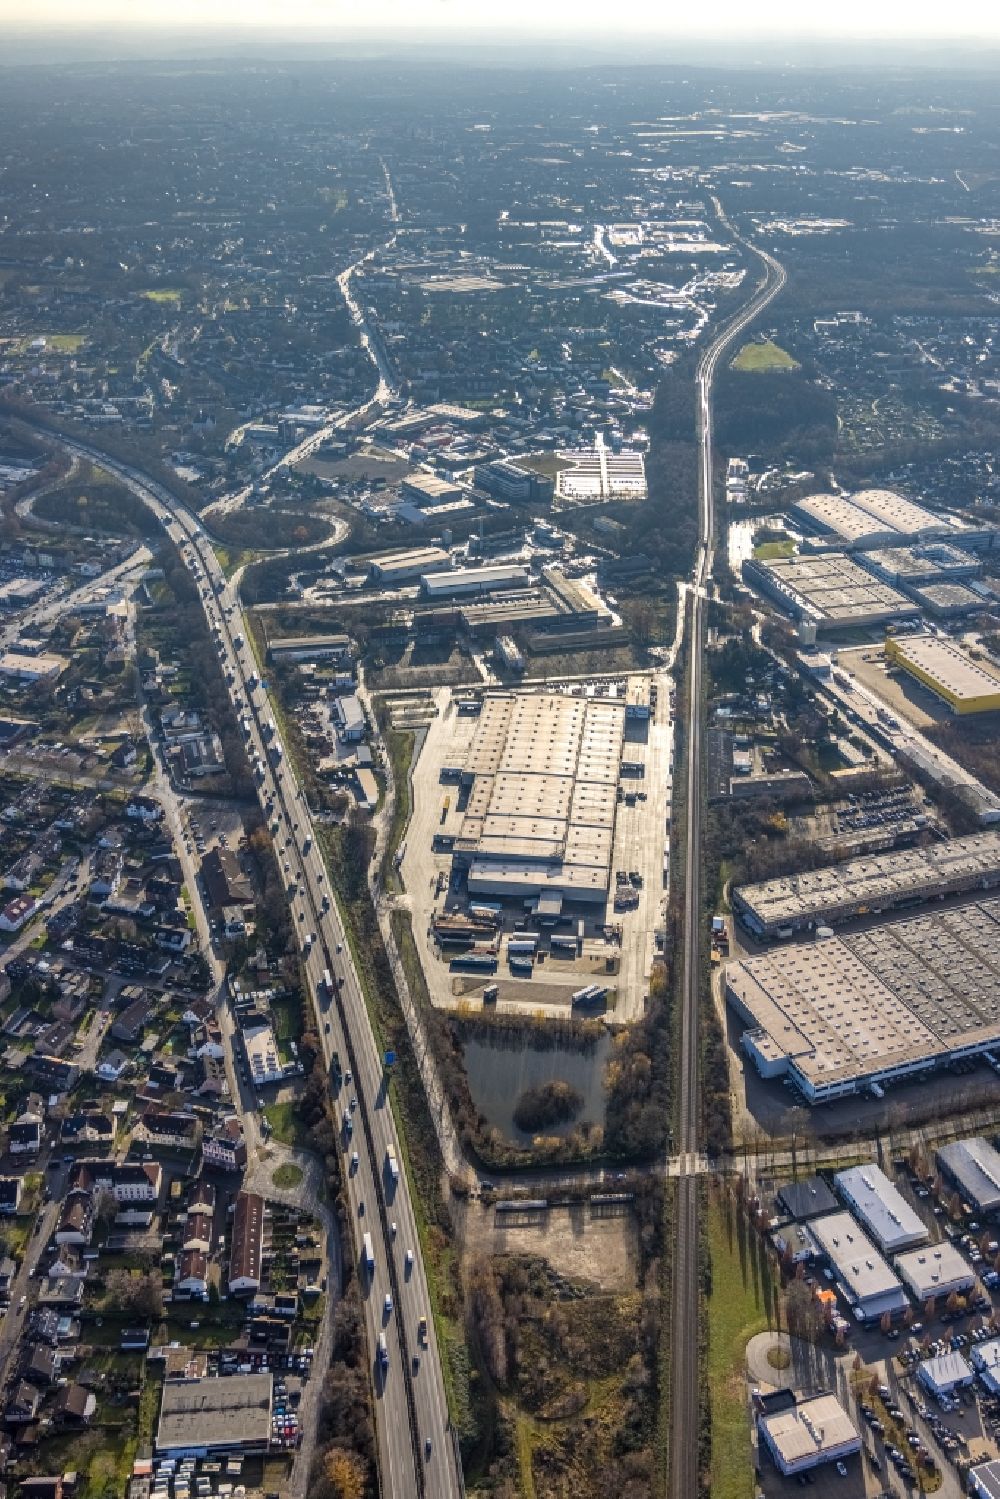 Aerial image Herne - Aerial view of the high-bay warehouse building complex and logistics centre on the premises of Lidl Vertriebs GmbH & Co. KG Discounter Logitikzentrum in Suedstrasse in Herne in the federal state of North Rhine-Westphalia, Germany